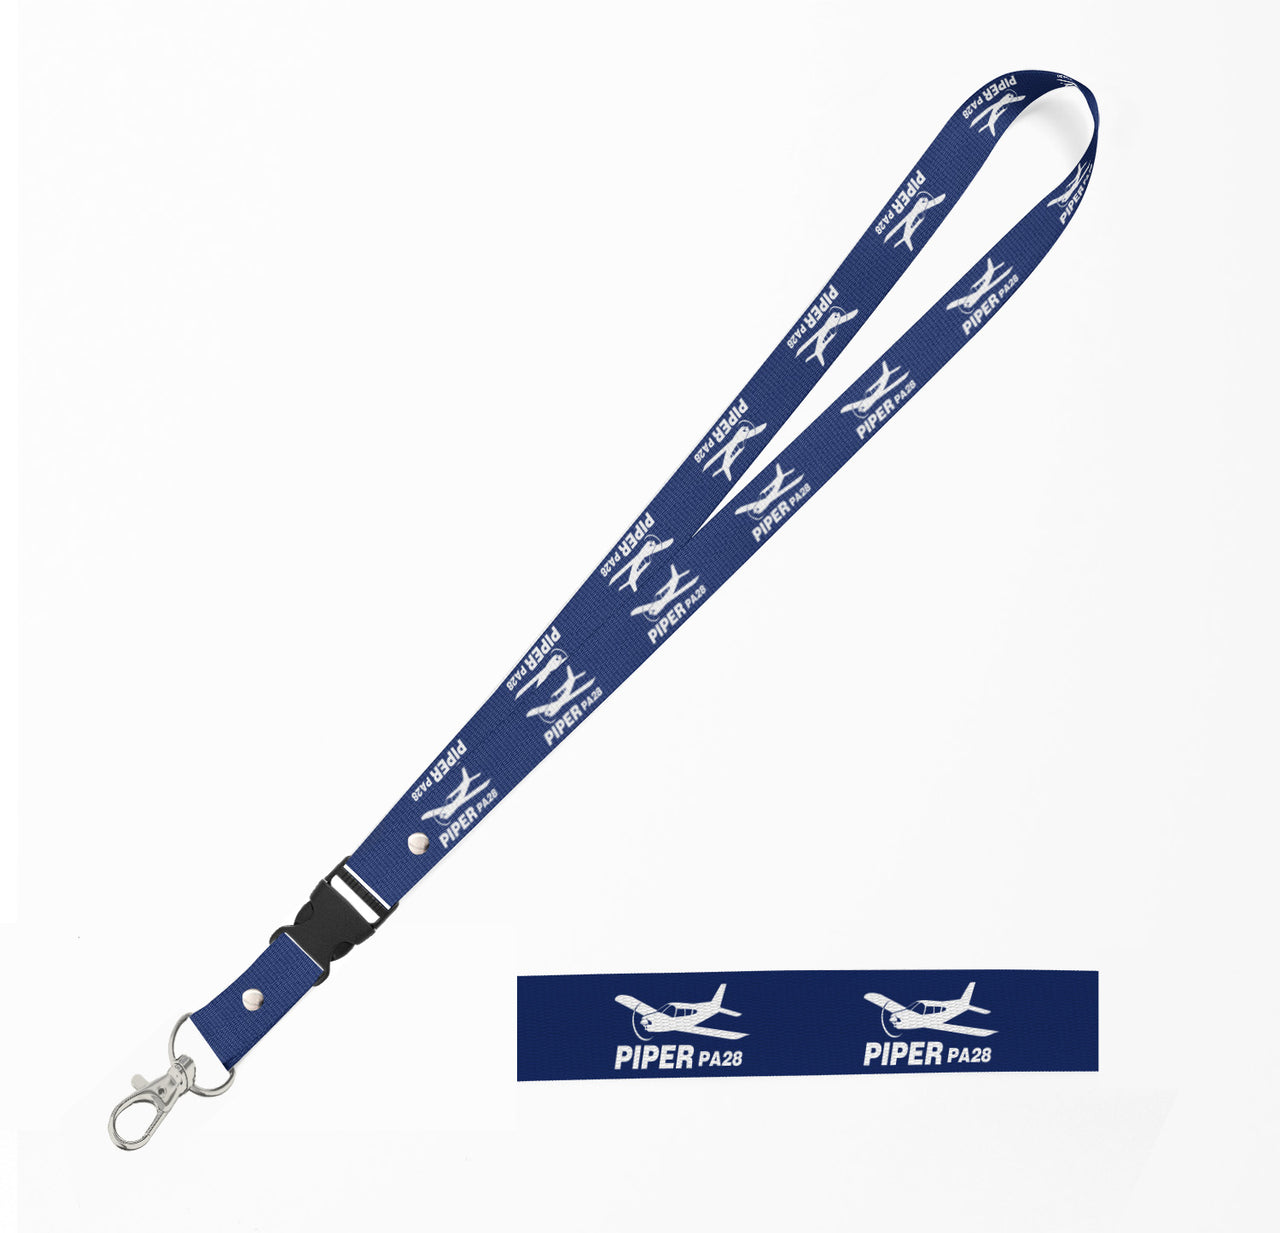 The Piper PA28 Designed Detachable Lanyard & ID Holders